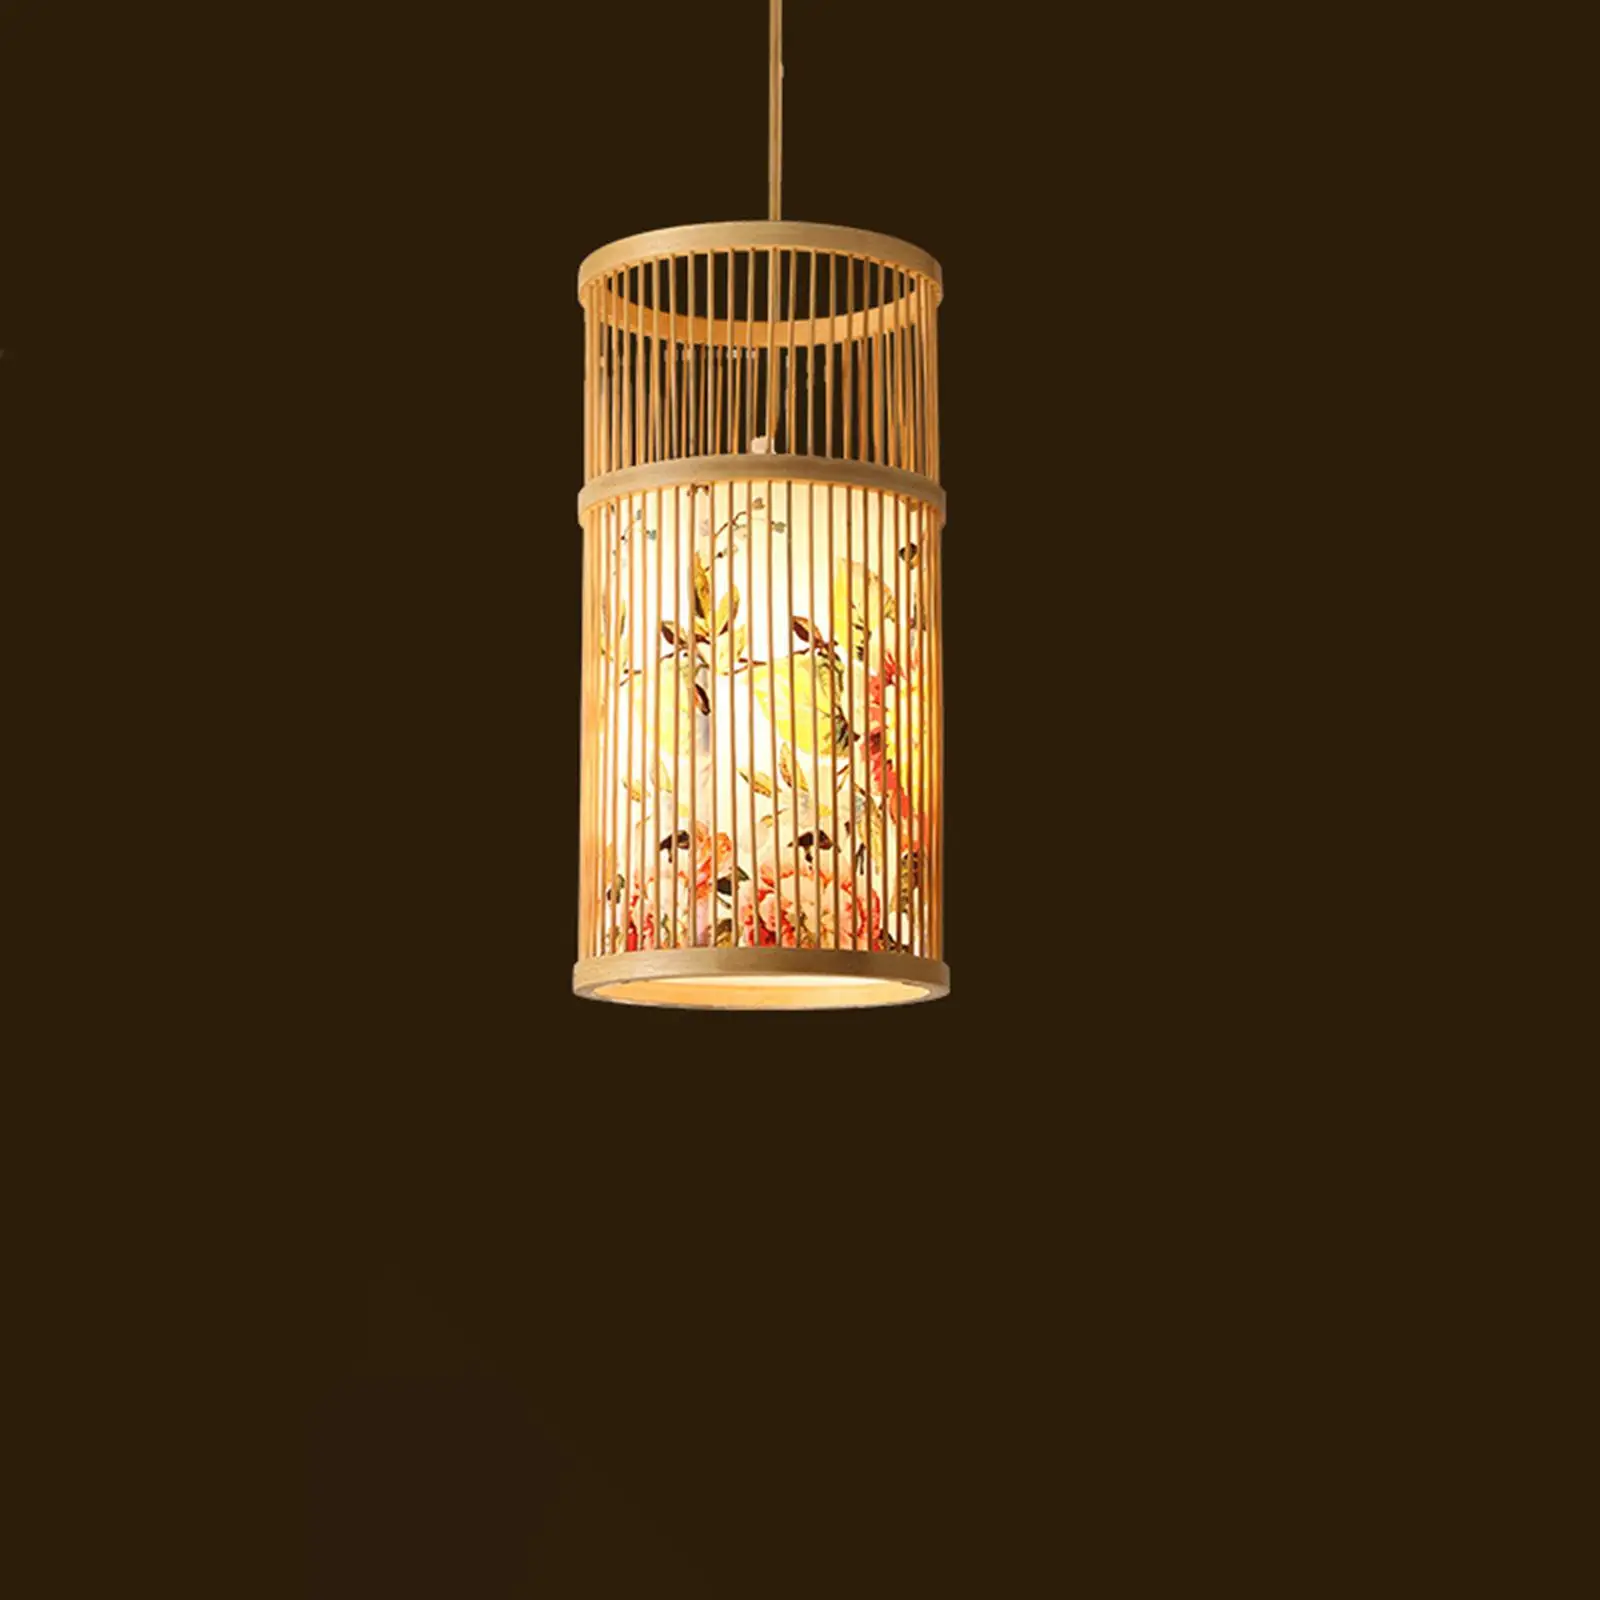 Ceiling Light Cover Rustic Decorative Hanging Lamp Japanese Style Woven Lamp Shade for Dining Livingroom Clubs Teahouse Bedroom